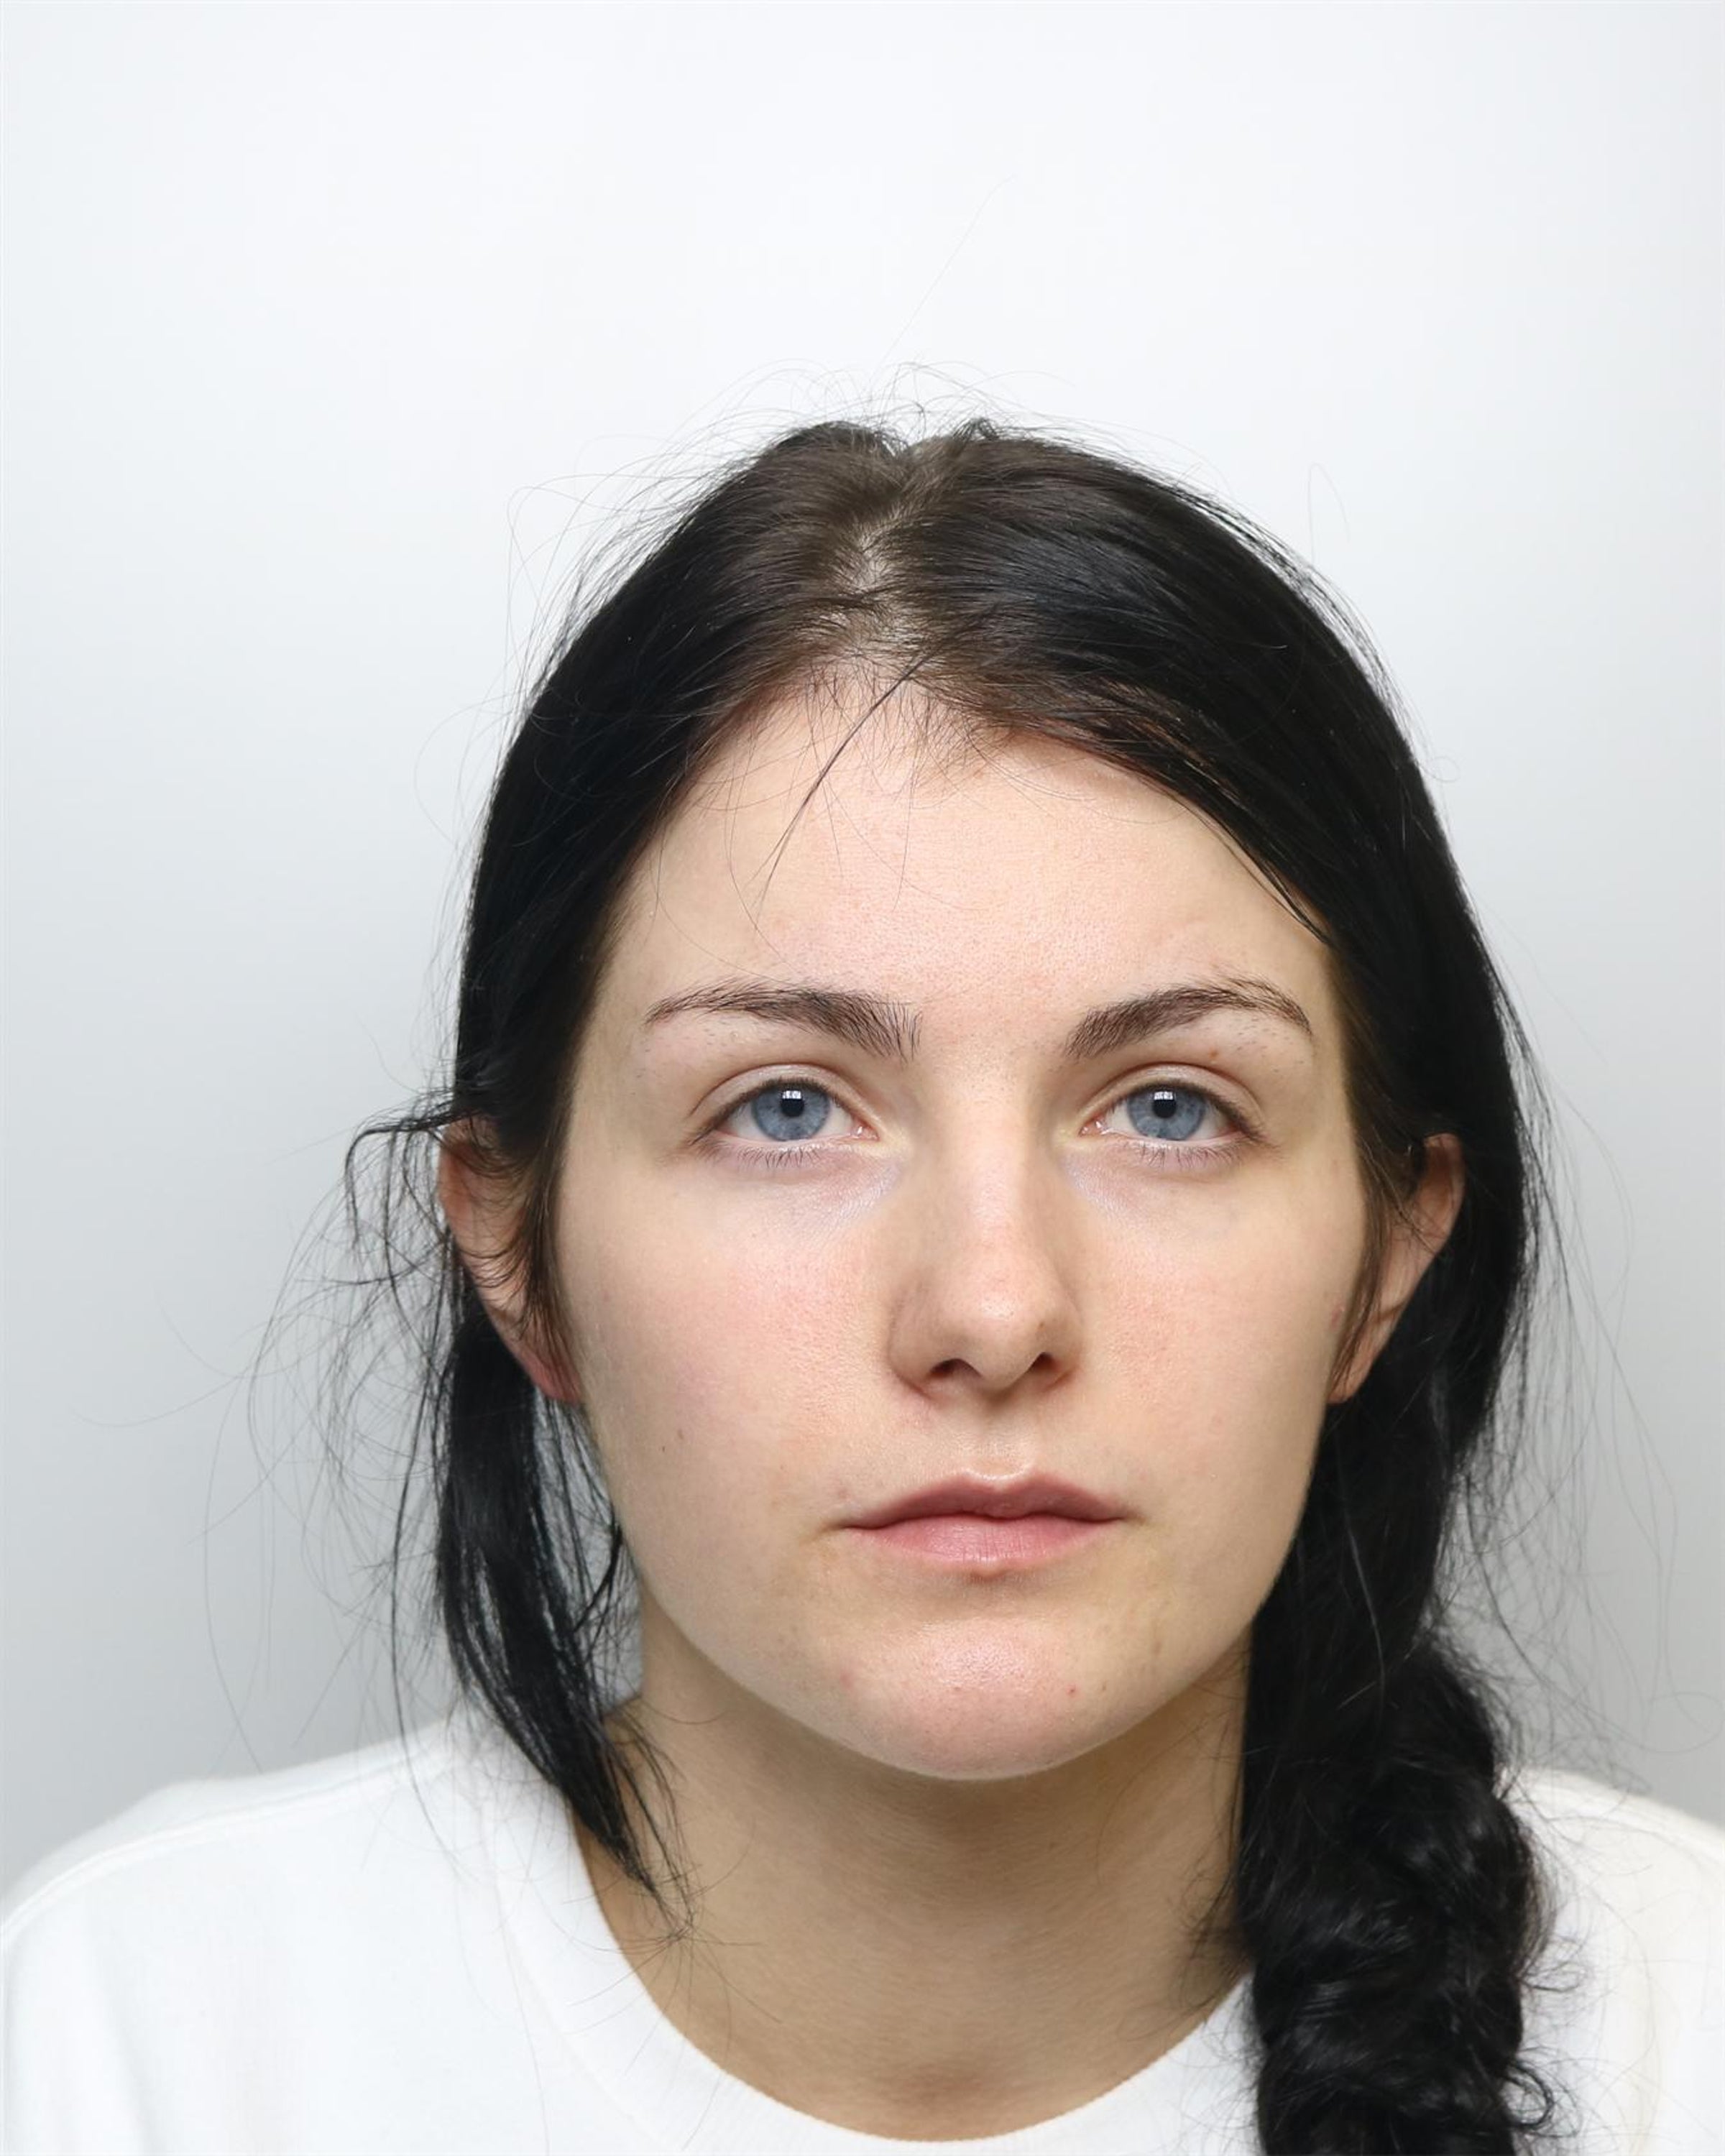 Frankie Smith allowed her daughter to die after starting a toxic relationship with Savannah Brockhill (West Yorkshire Police/PA)